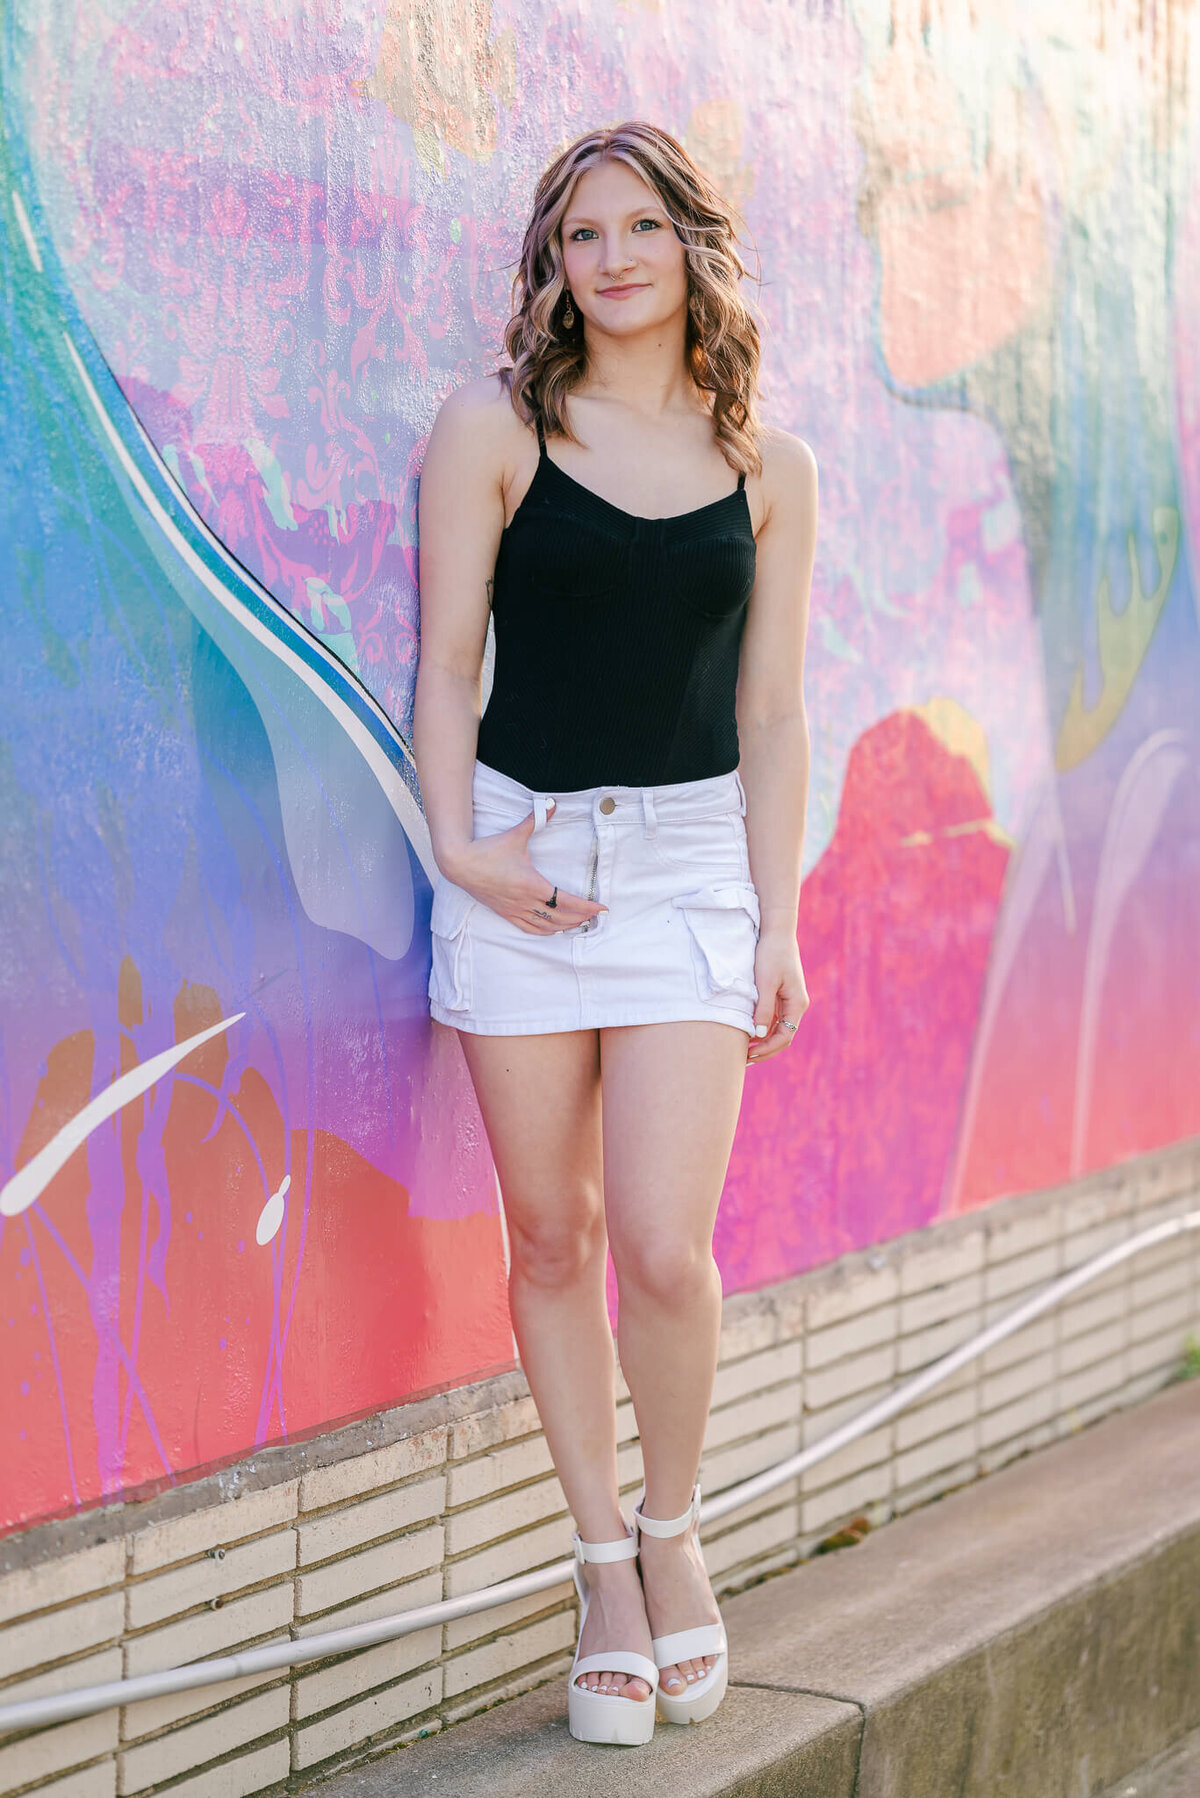 A high school senior, wearing a black top and white skirt and heels leans against a colorful mural. She is popping one leg and has her hand hooked through her belt loops. She is at her senior session with Chesapeake senior photographer Justine Renee Photography.